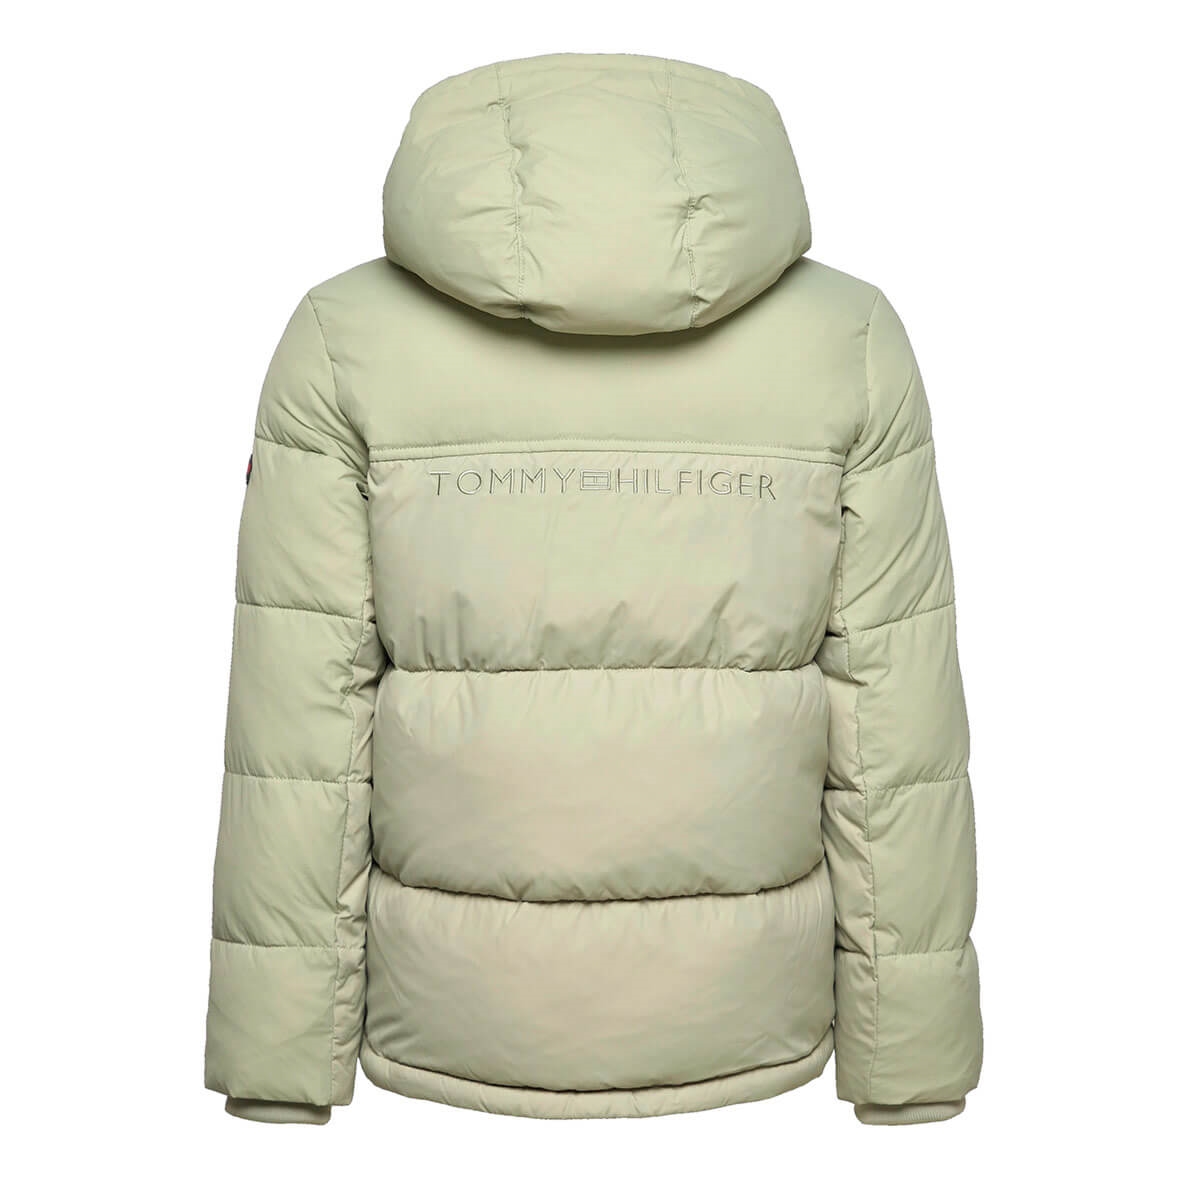 Tommy Hilfiger Jacket Faded Willow